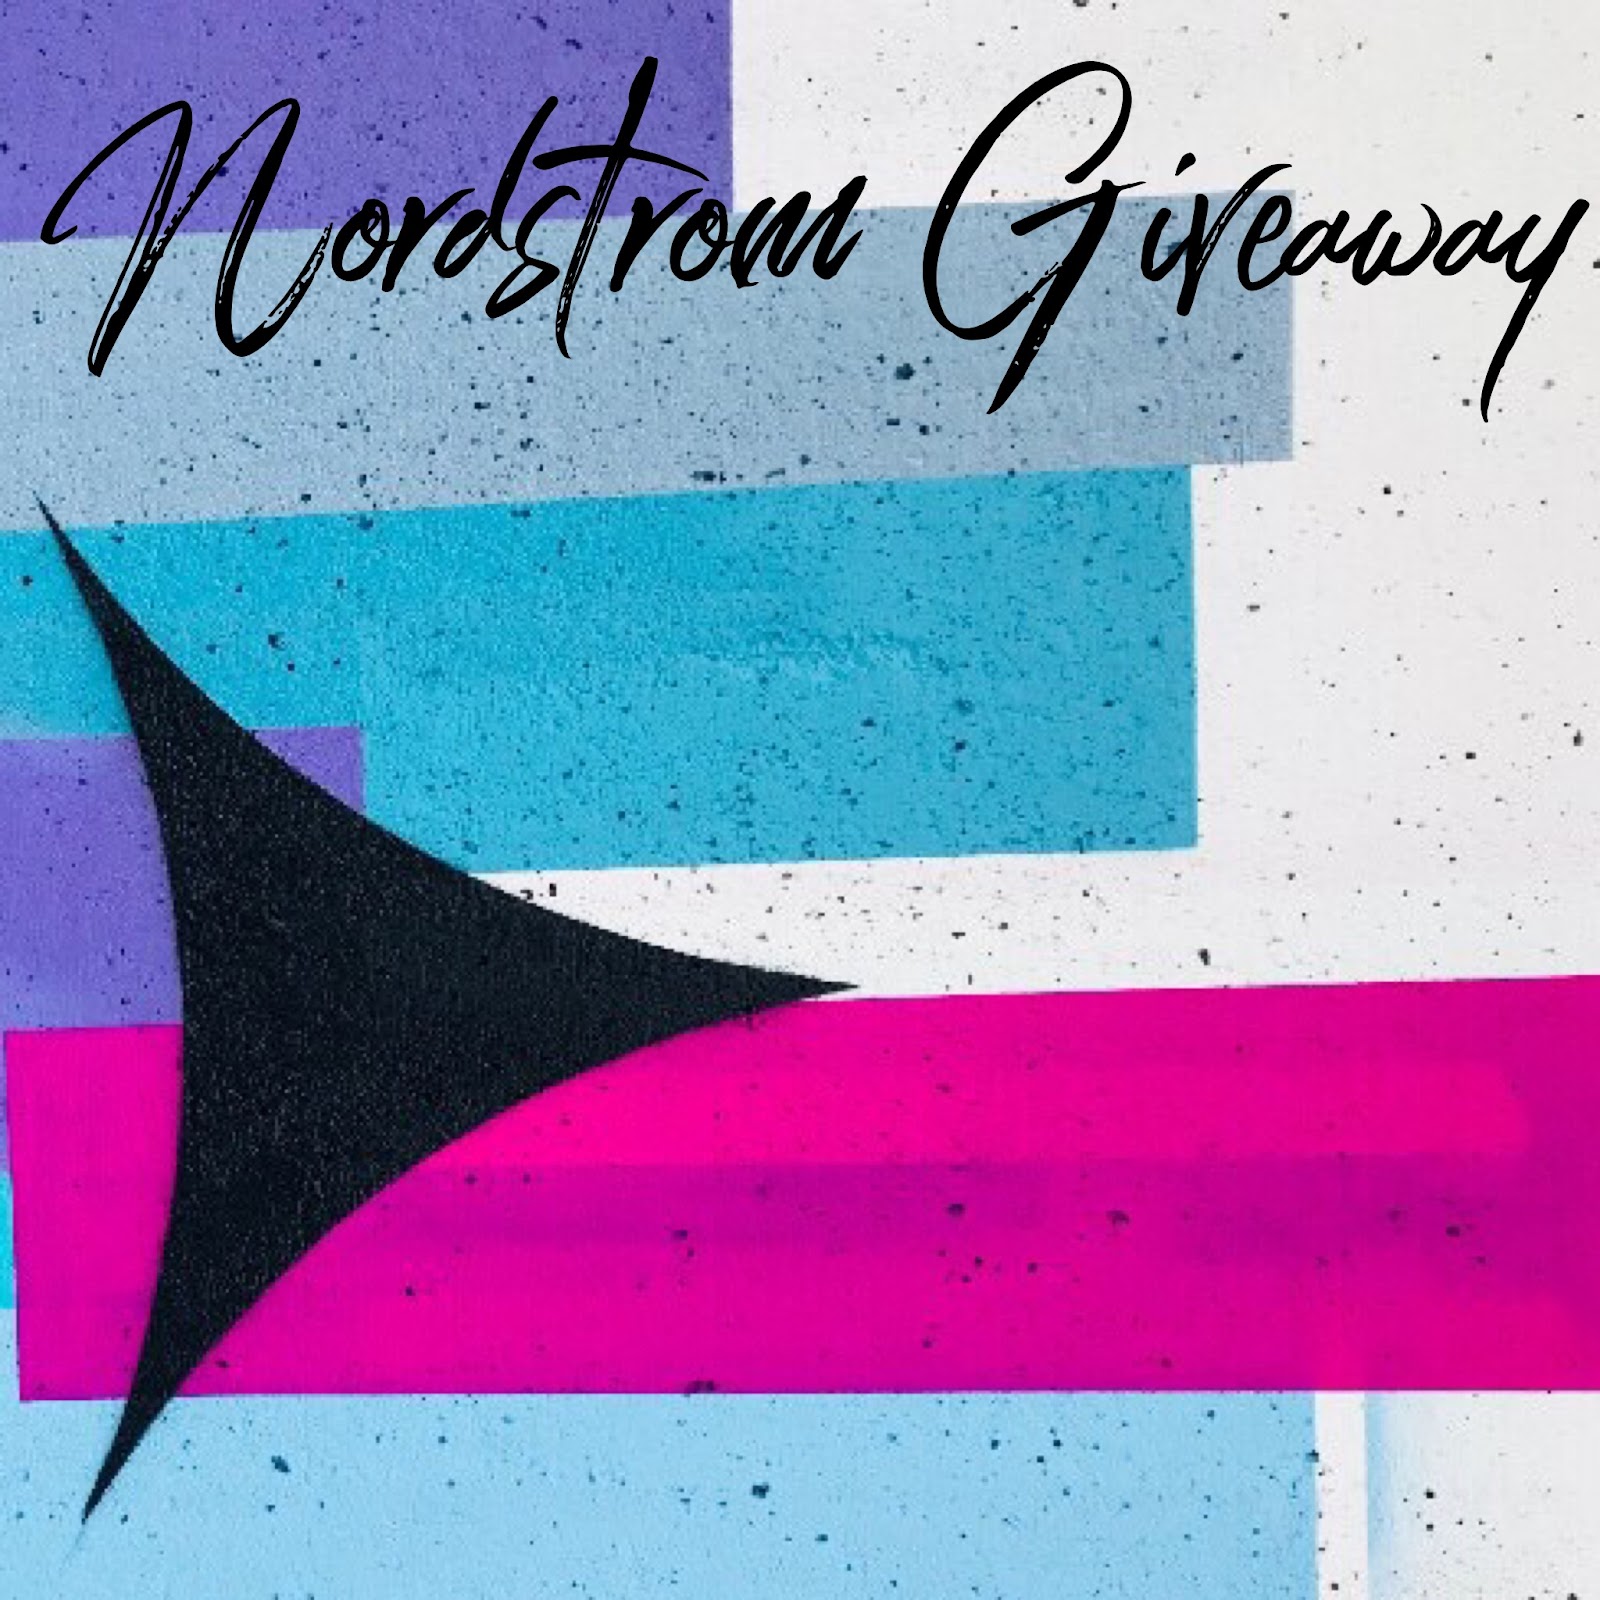 100 Nordstrom Gift Card Giveaway